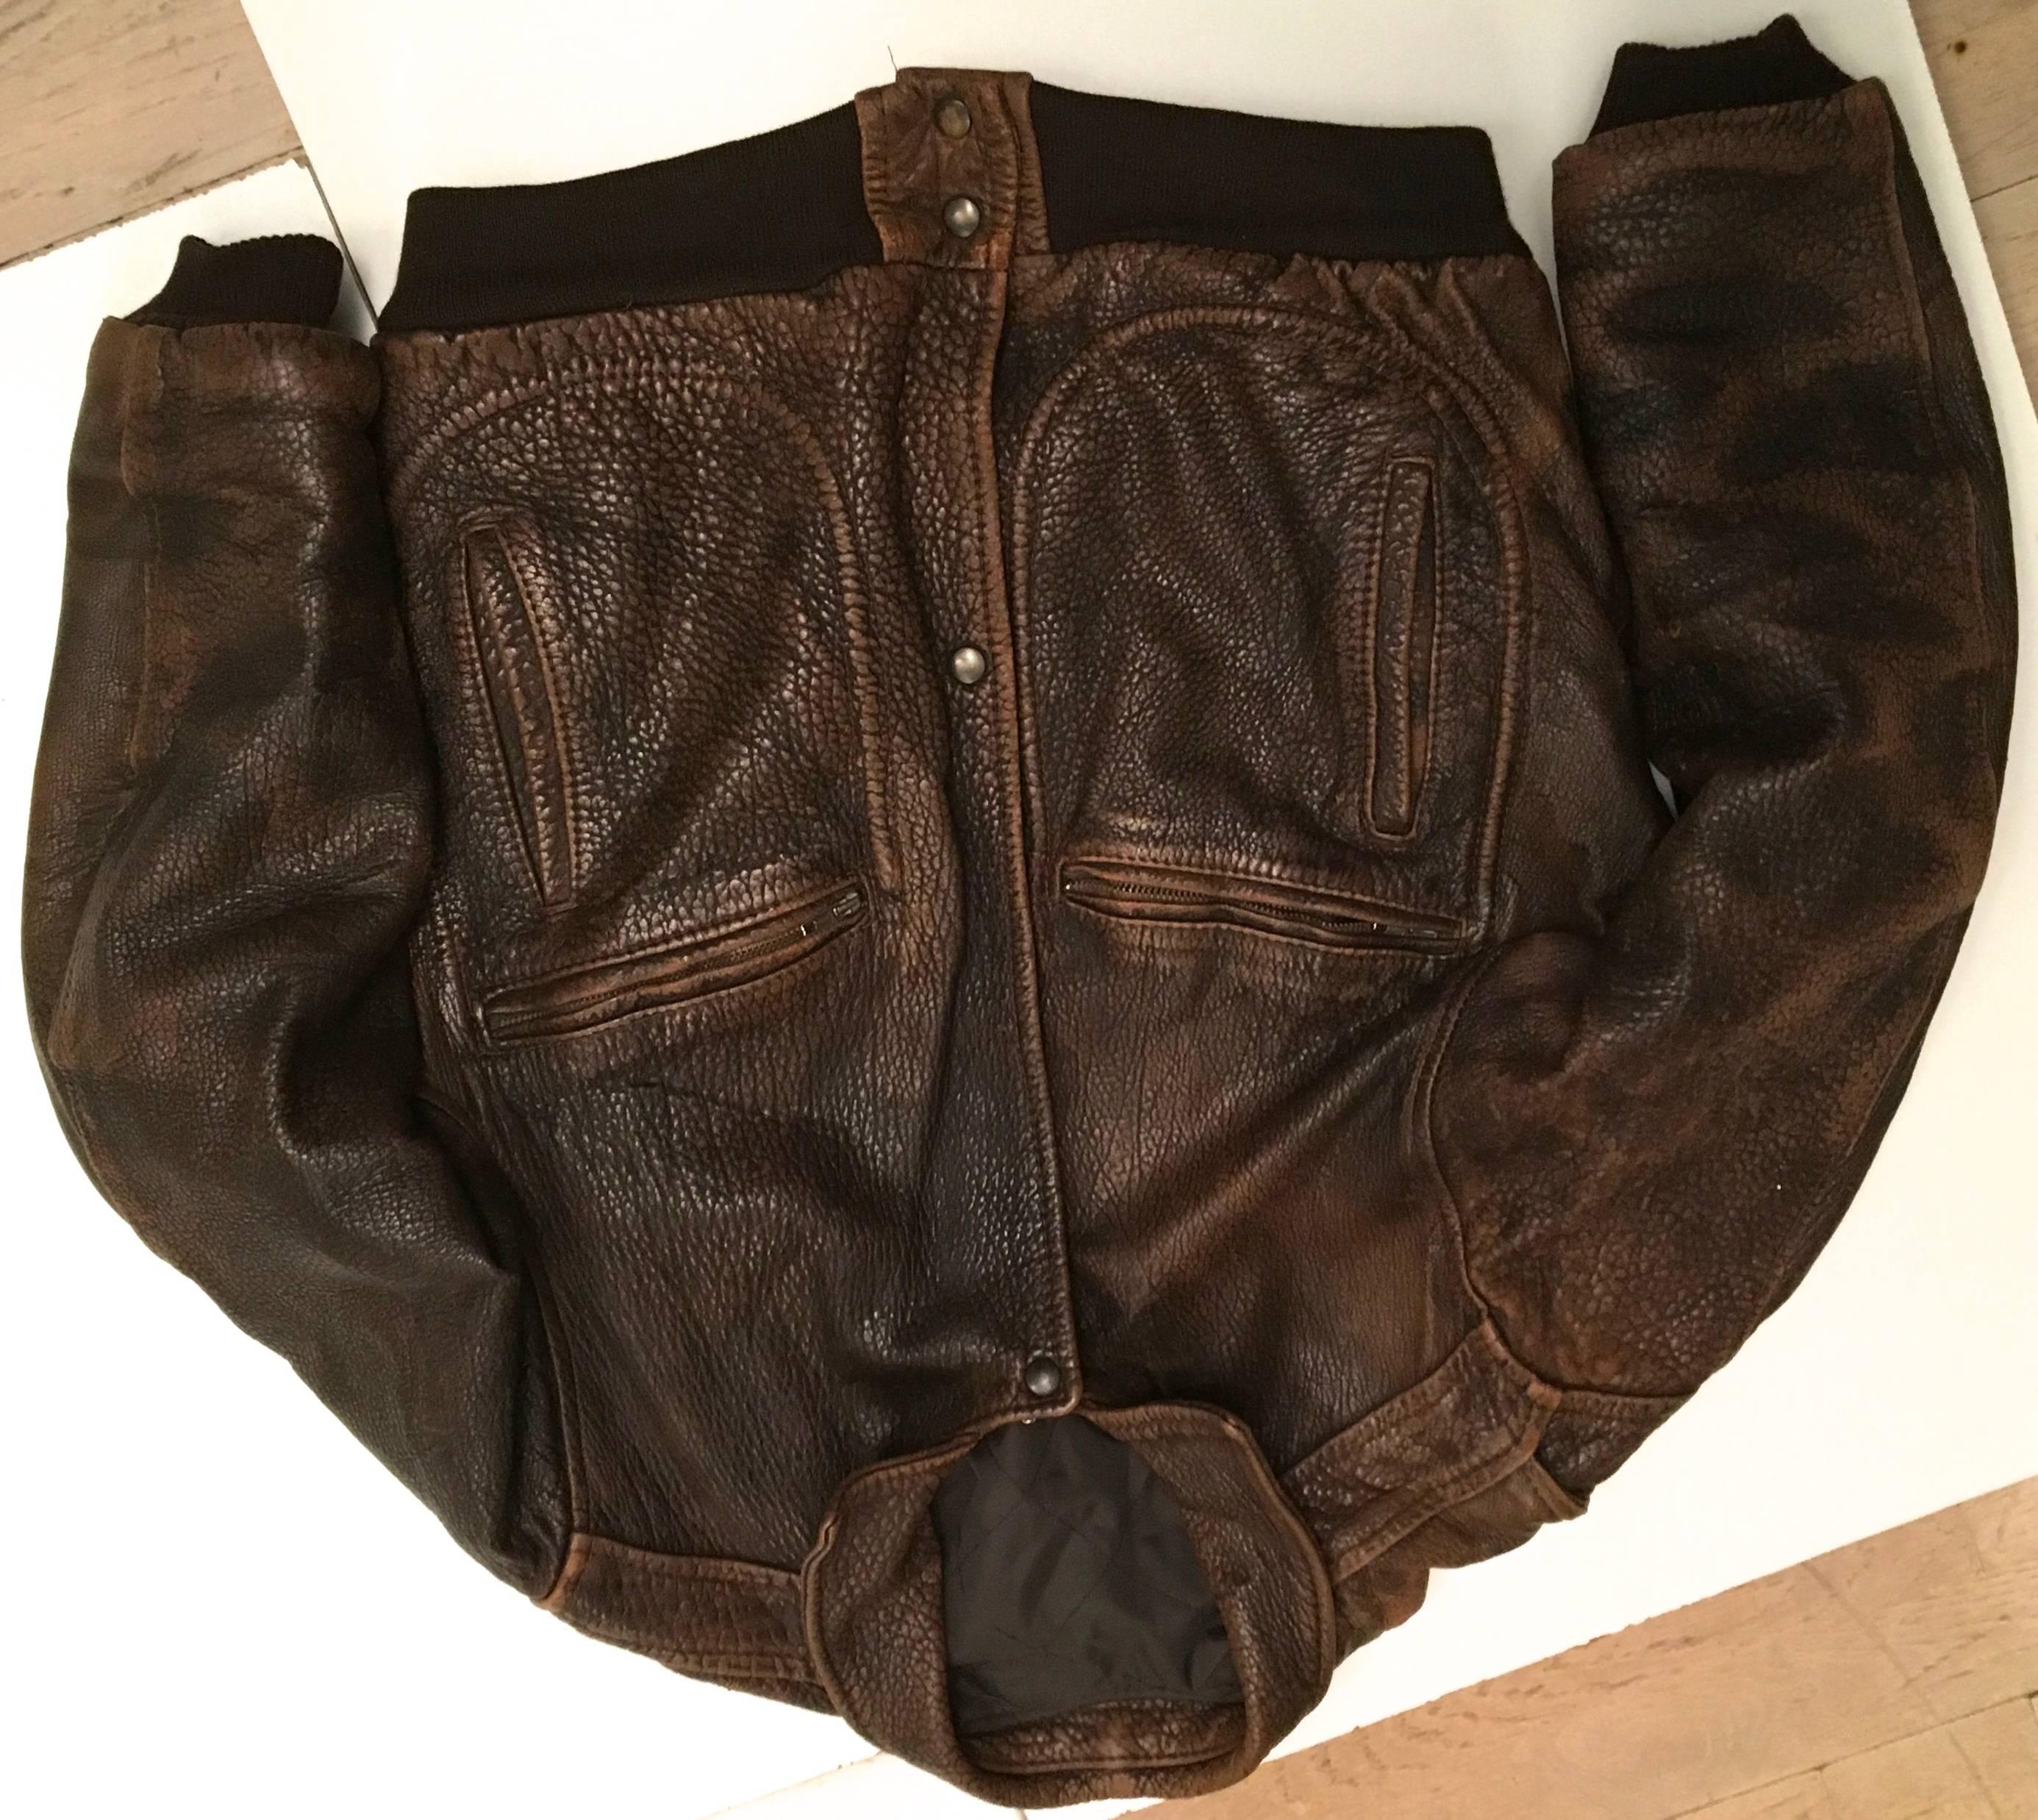 Presented here is a men's bomber jacket from the 1980's. This jacket is comprised of a beautiful brown leather on the exterior and brown fabric lining on the interior. There are four pockets on the front of the coat: two zipper pockets and two open